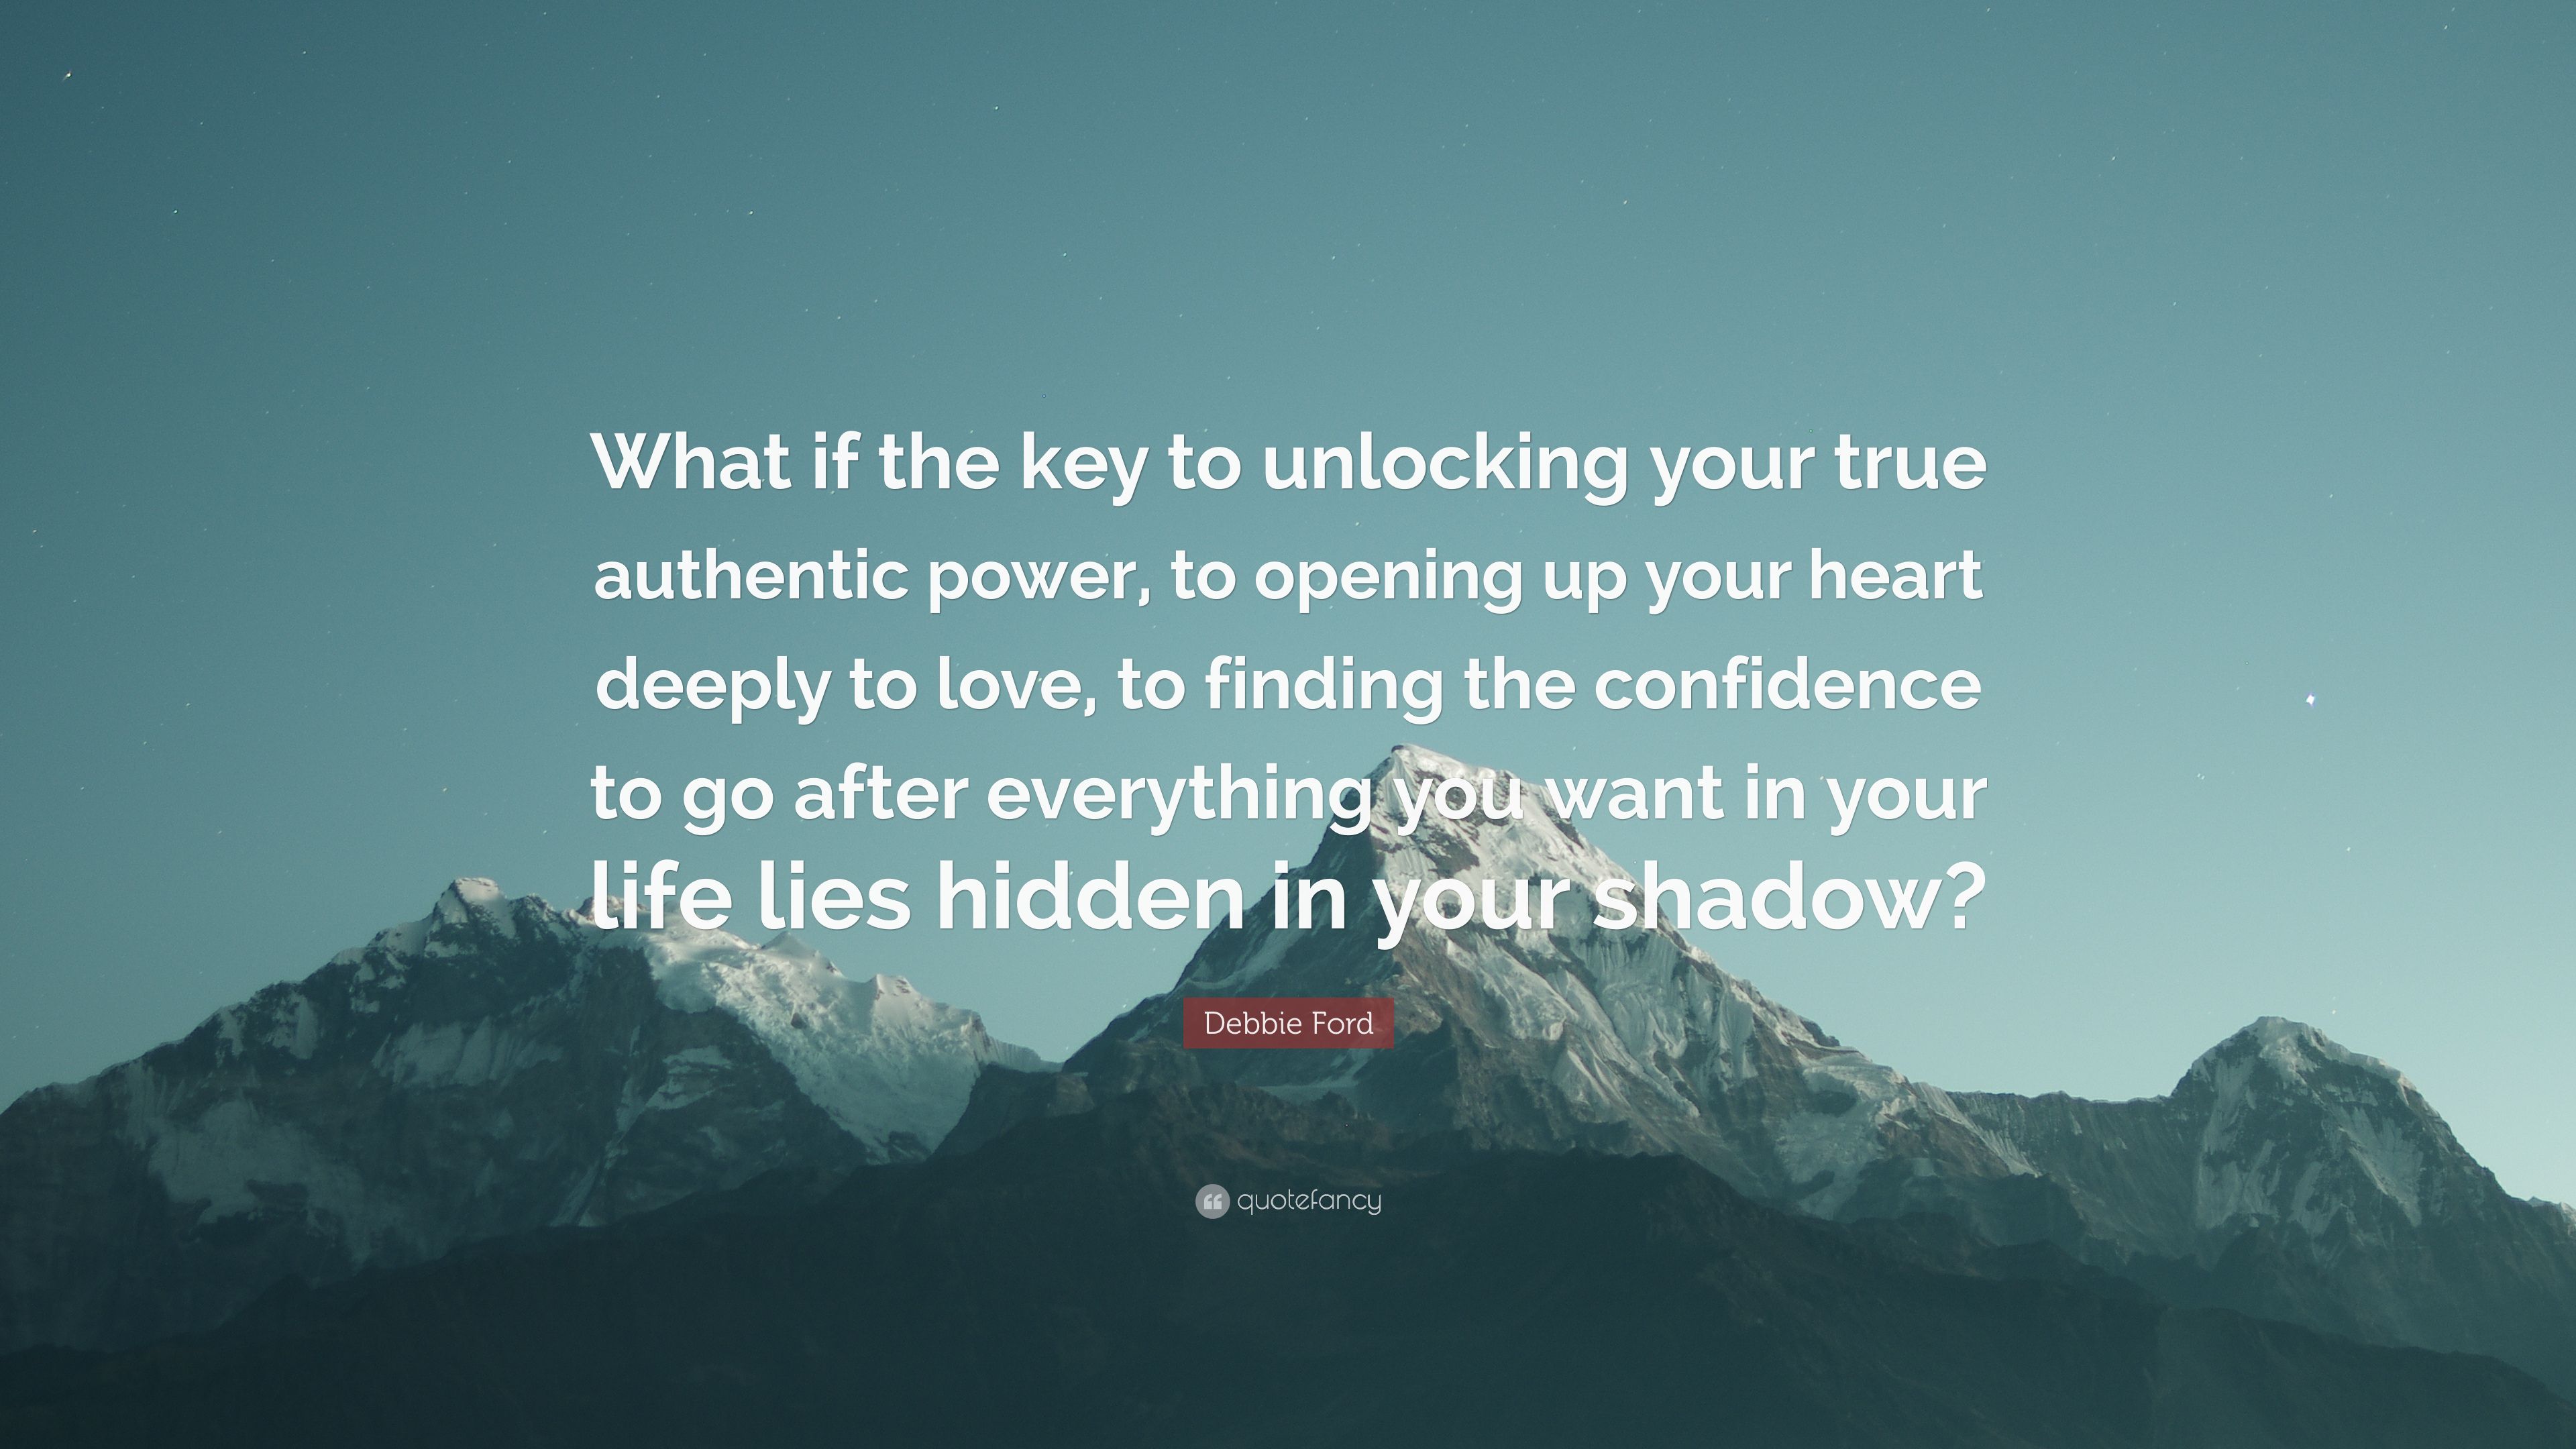 Debbie Ford Quote: “What if the key to unlocking your true authentic power, to opening up your heart deeply to love, to finding the confiden.” (7 wallpaper)